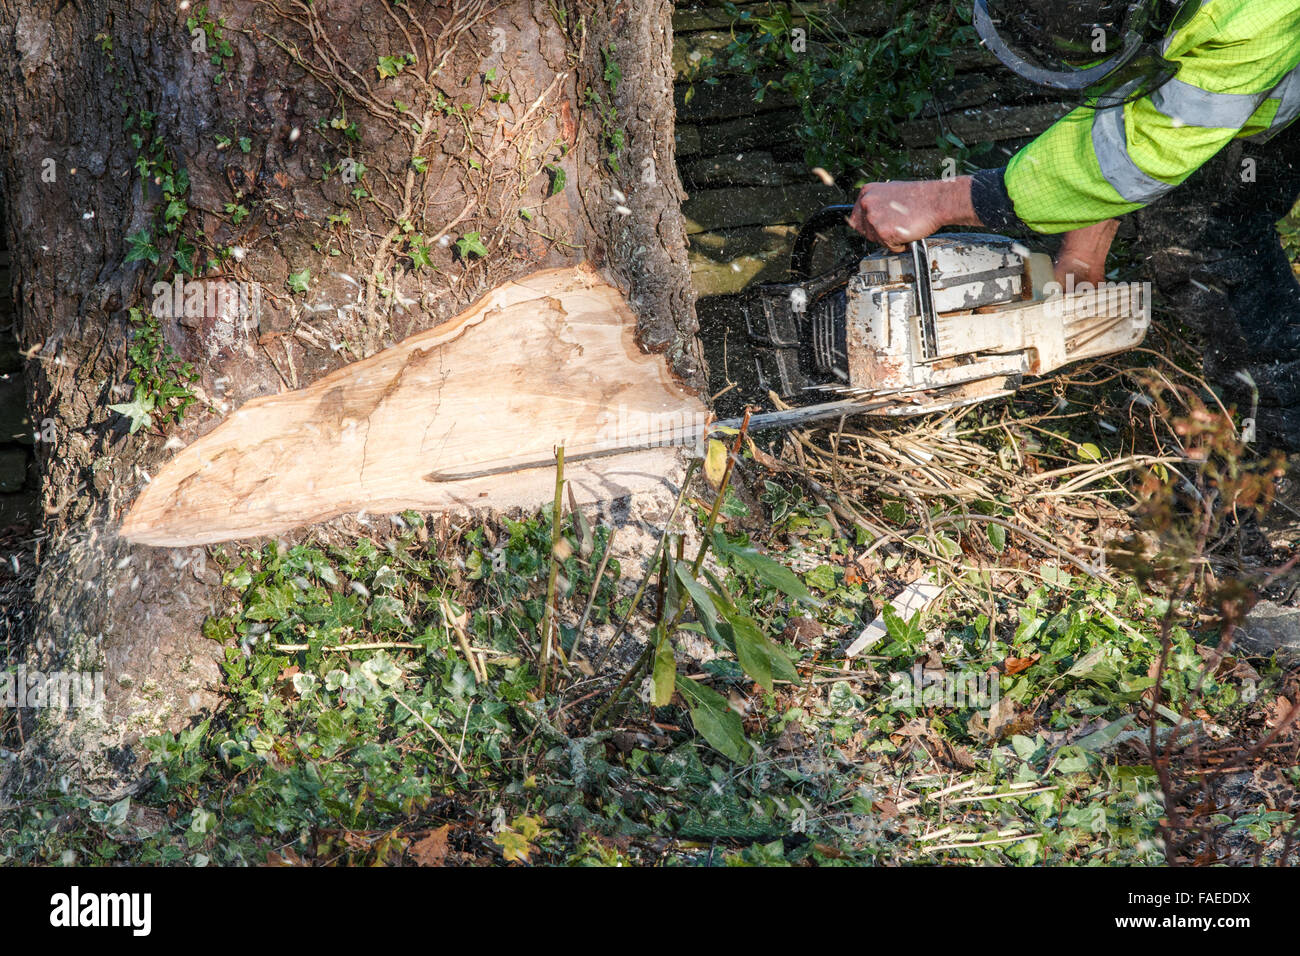 Chainsaw being used cutting through large tree trunk to fell the tree. Motion blur of wood chippings and sawdust Stock Photo